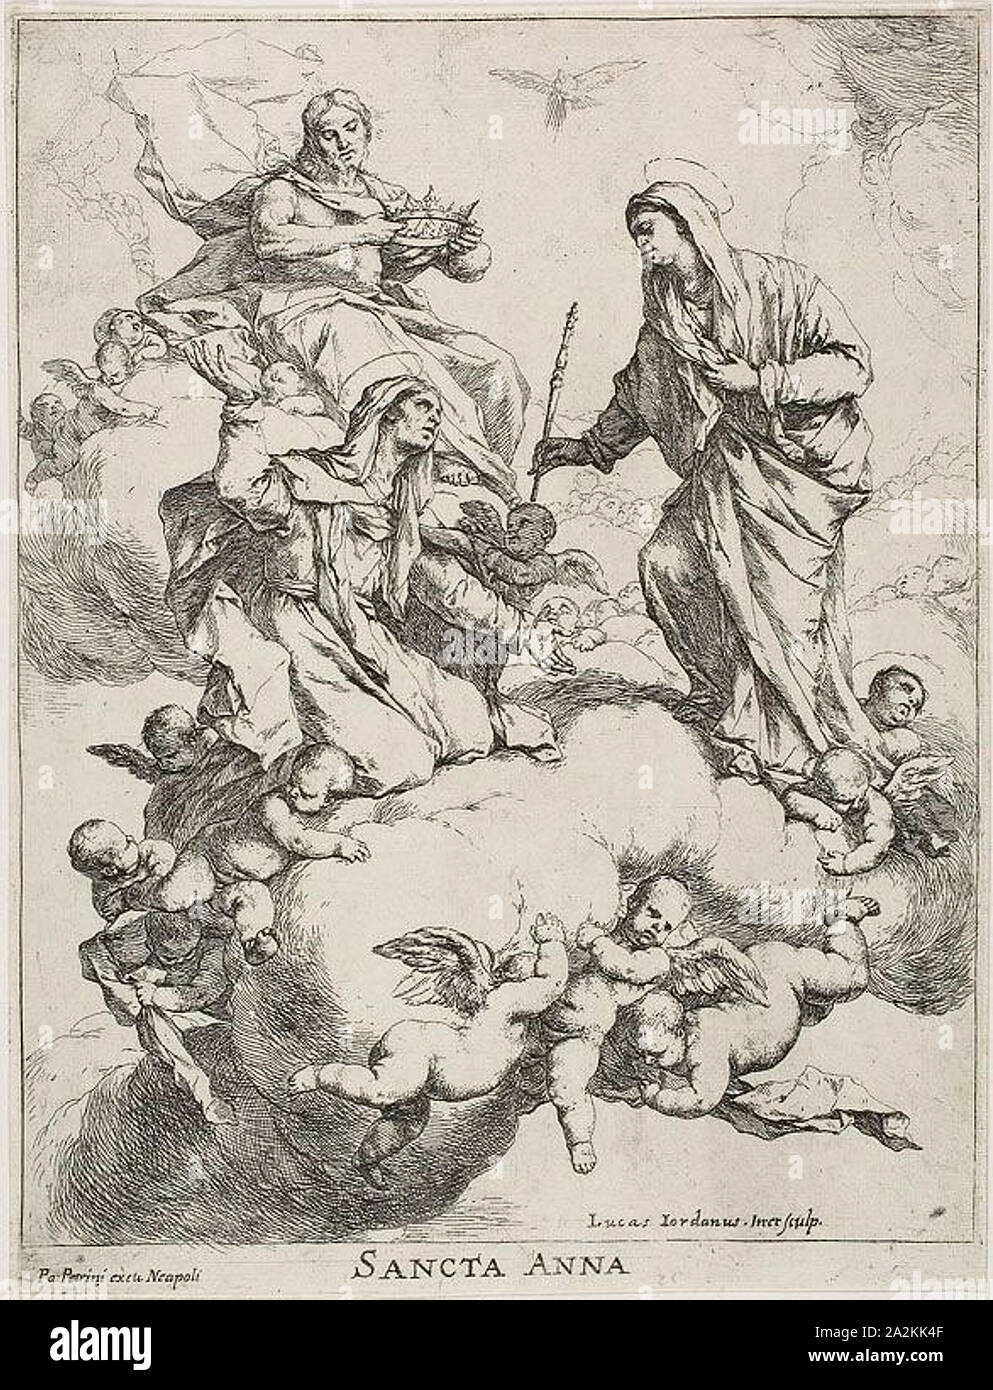 Saint Anne Received in Heaven by Christ and the Virgin, c. 1653, Luca Giordano, Italian, 1634-1705, Italy, Etching on ivory laid paper, 321 x 251 mm (image), 335 x 255 mm (plate), 338 x 258 mm (sheet Stock Photo